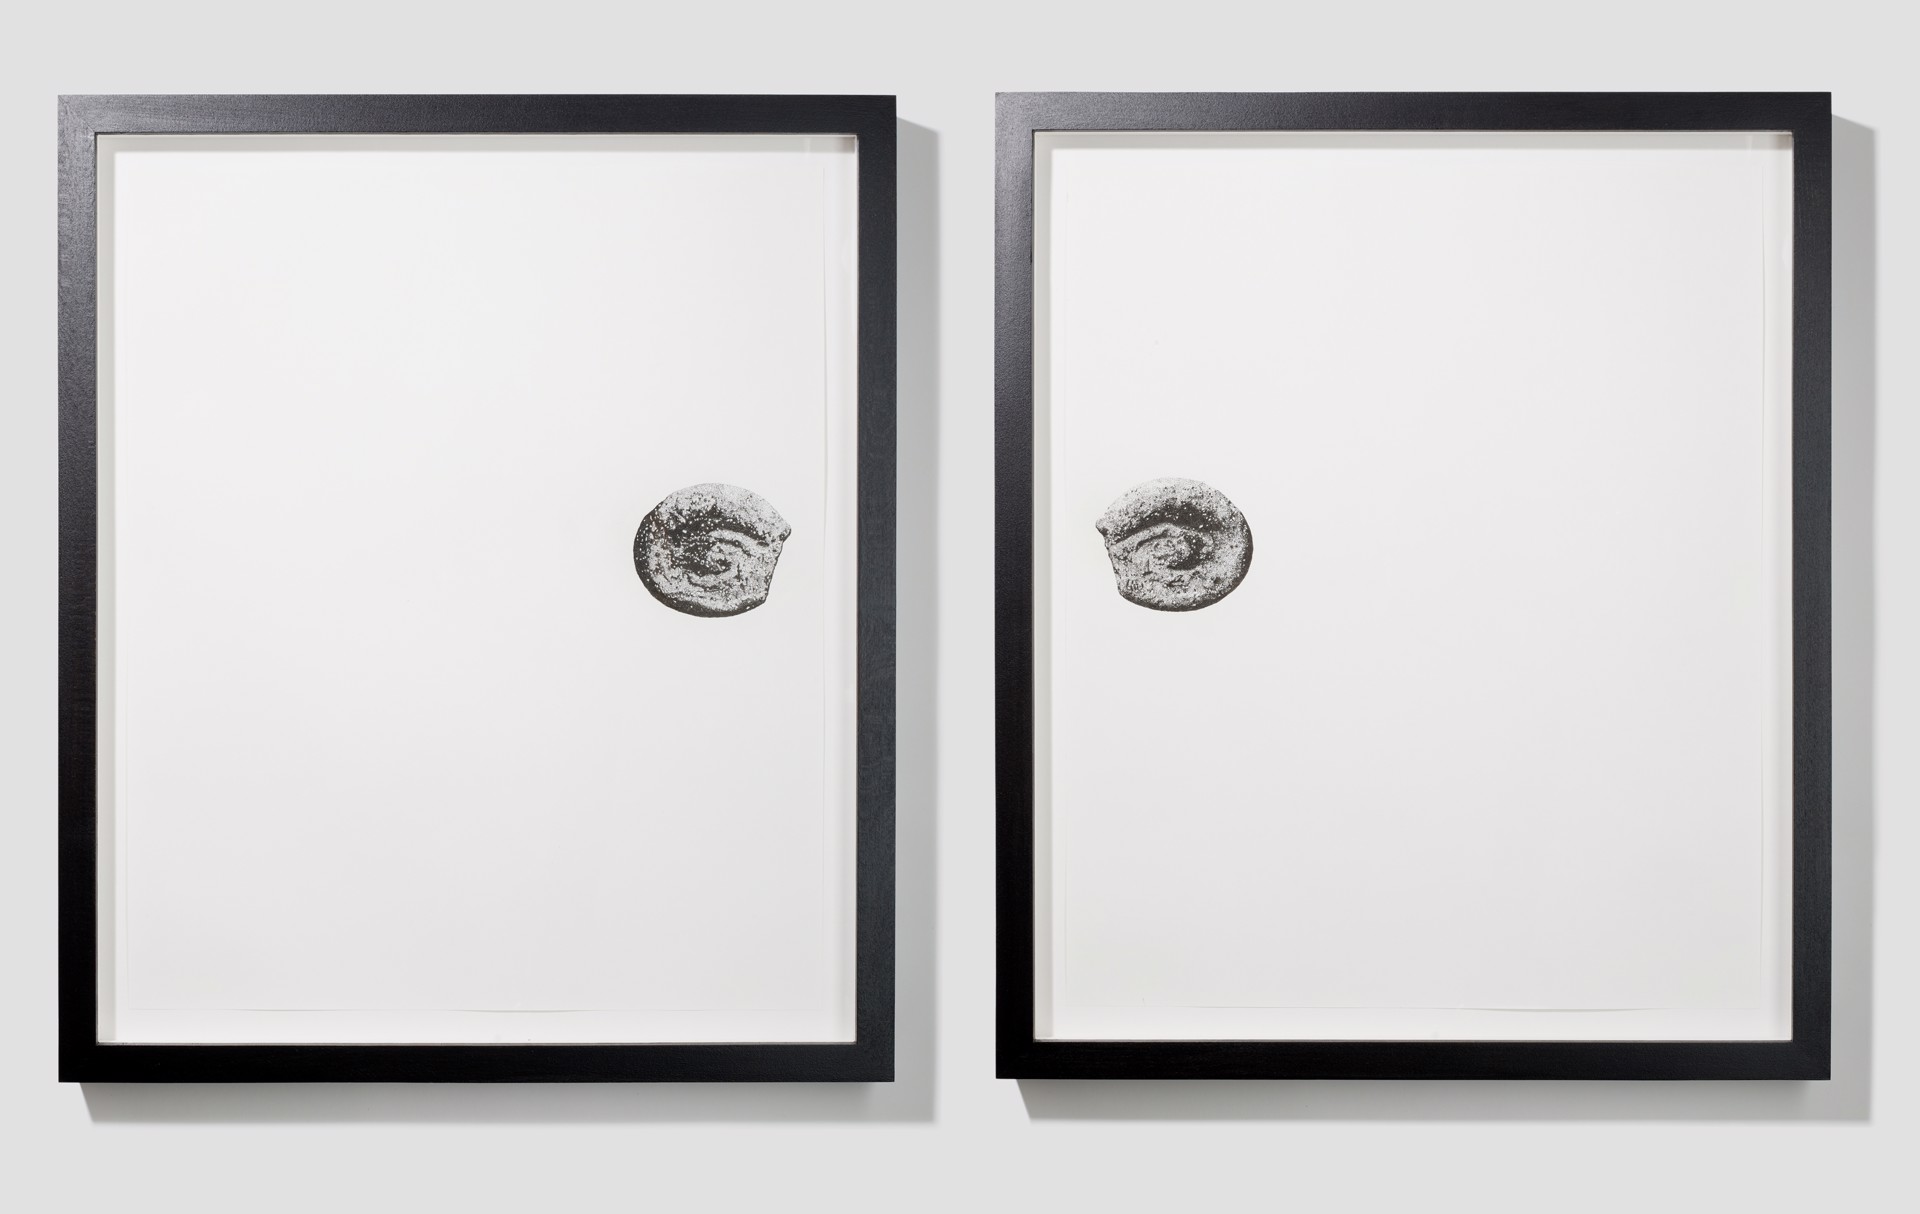 Beatific Vision IV (Diptych) by Thais Mather